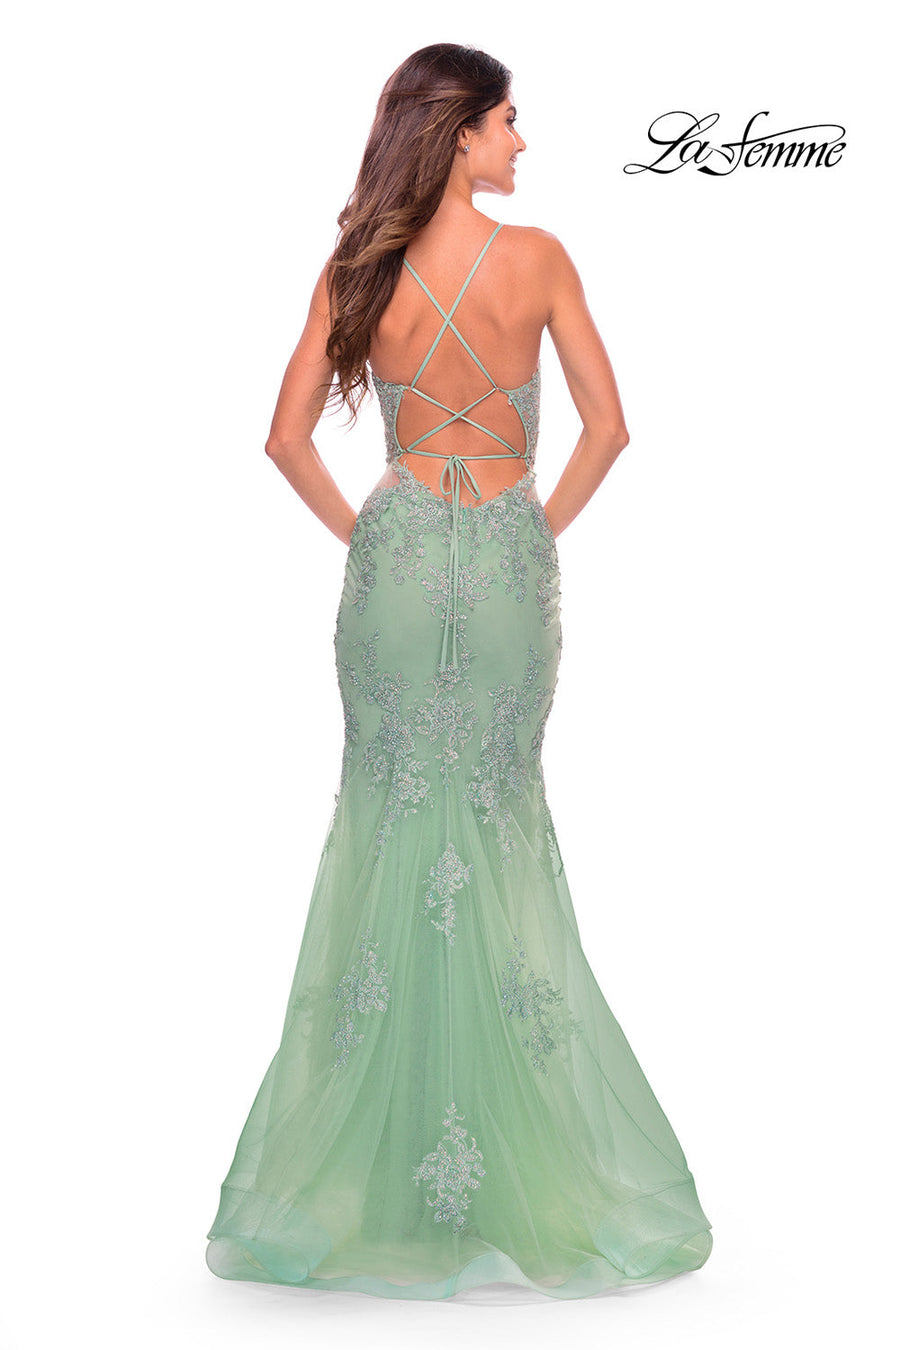 La Femme 31598 prom dress images.  La Femme 31598 is available in these colors: Dark Berry, Sage.